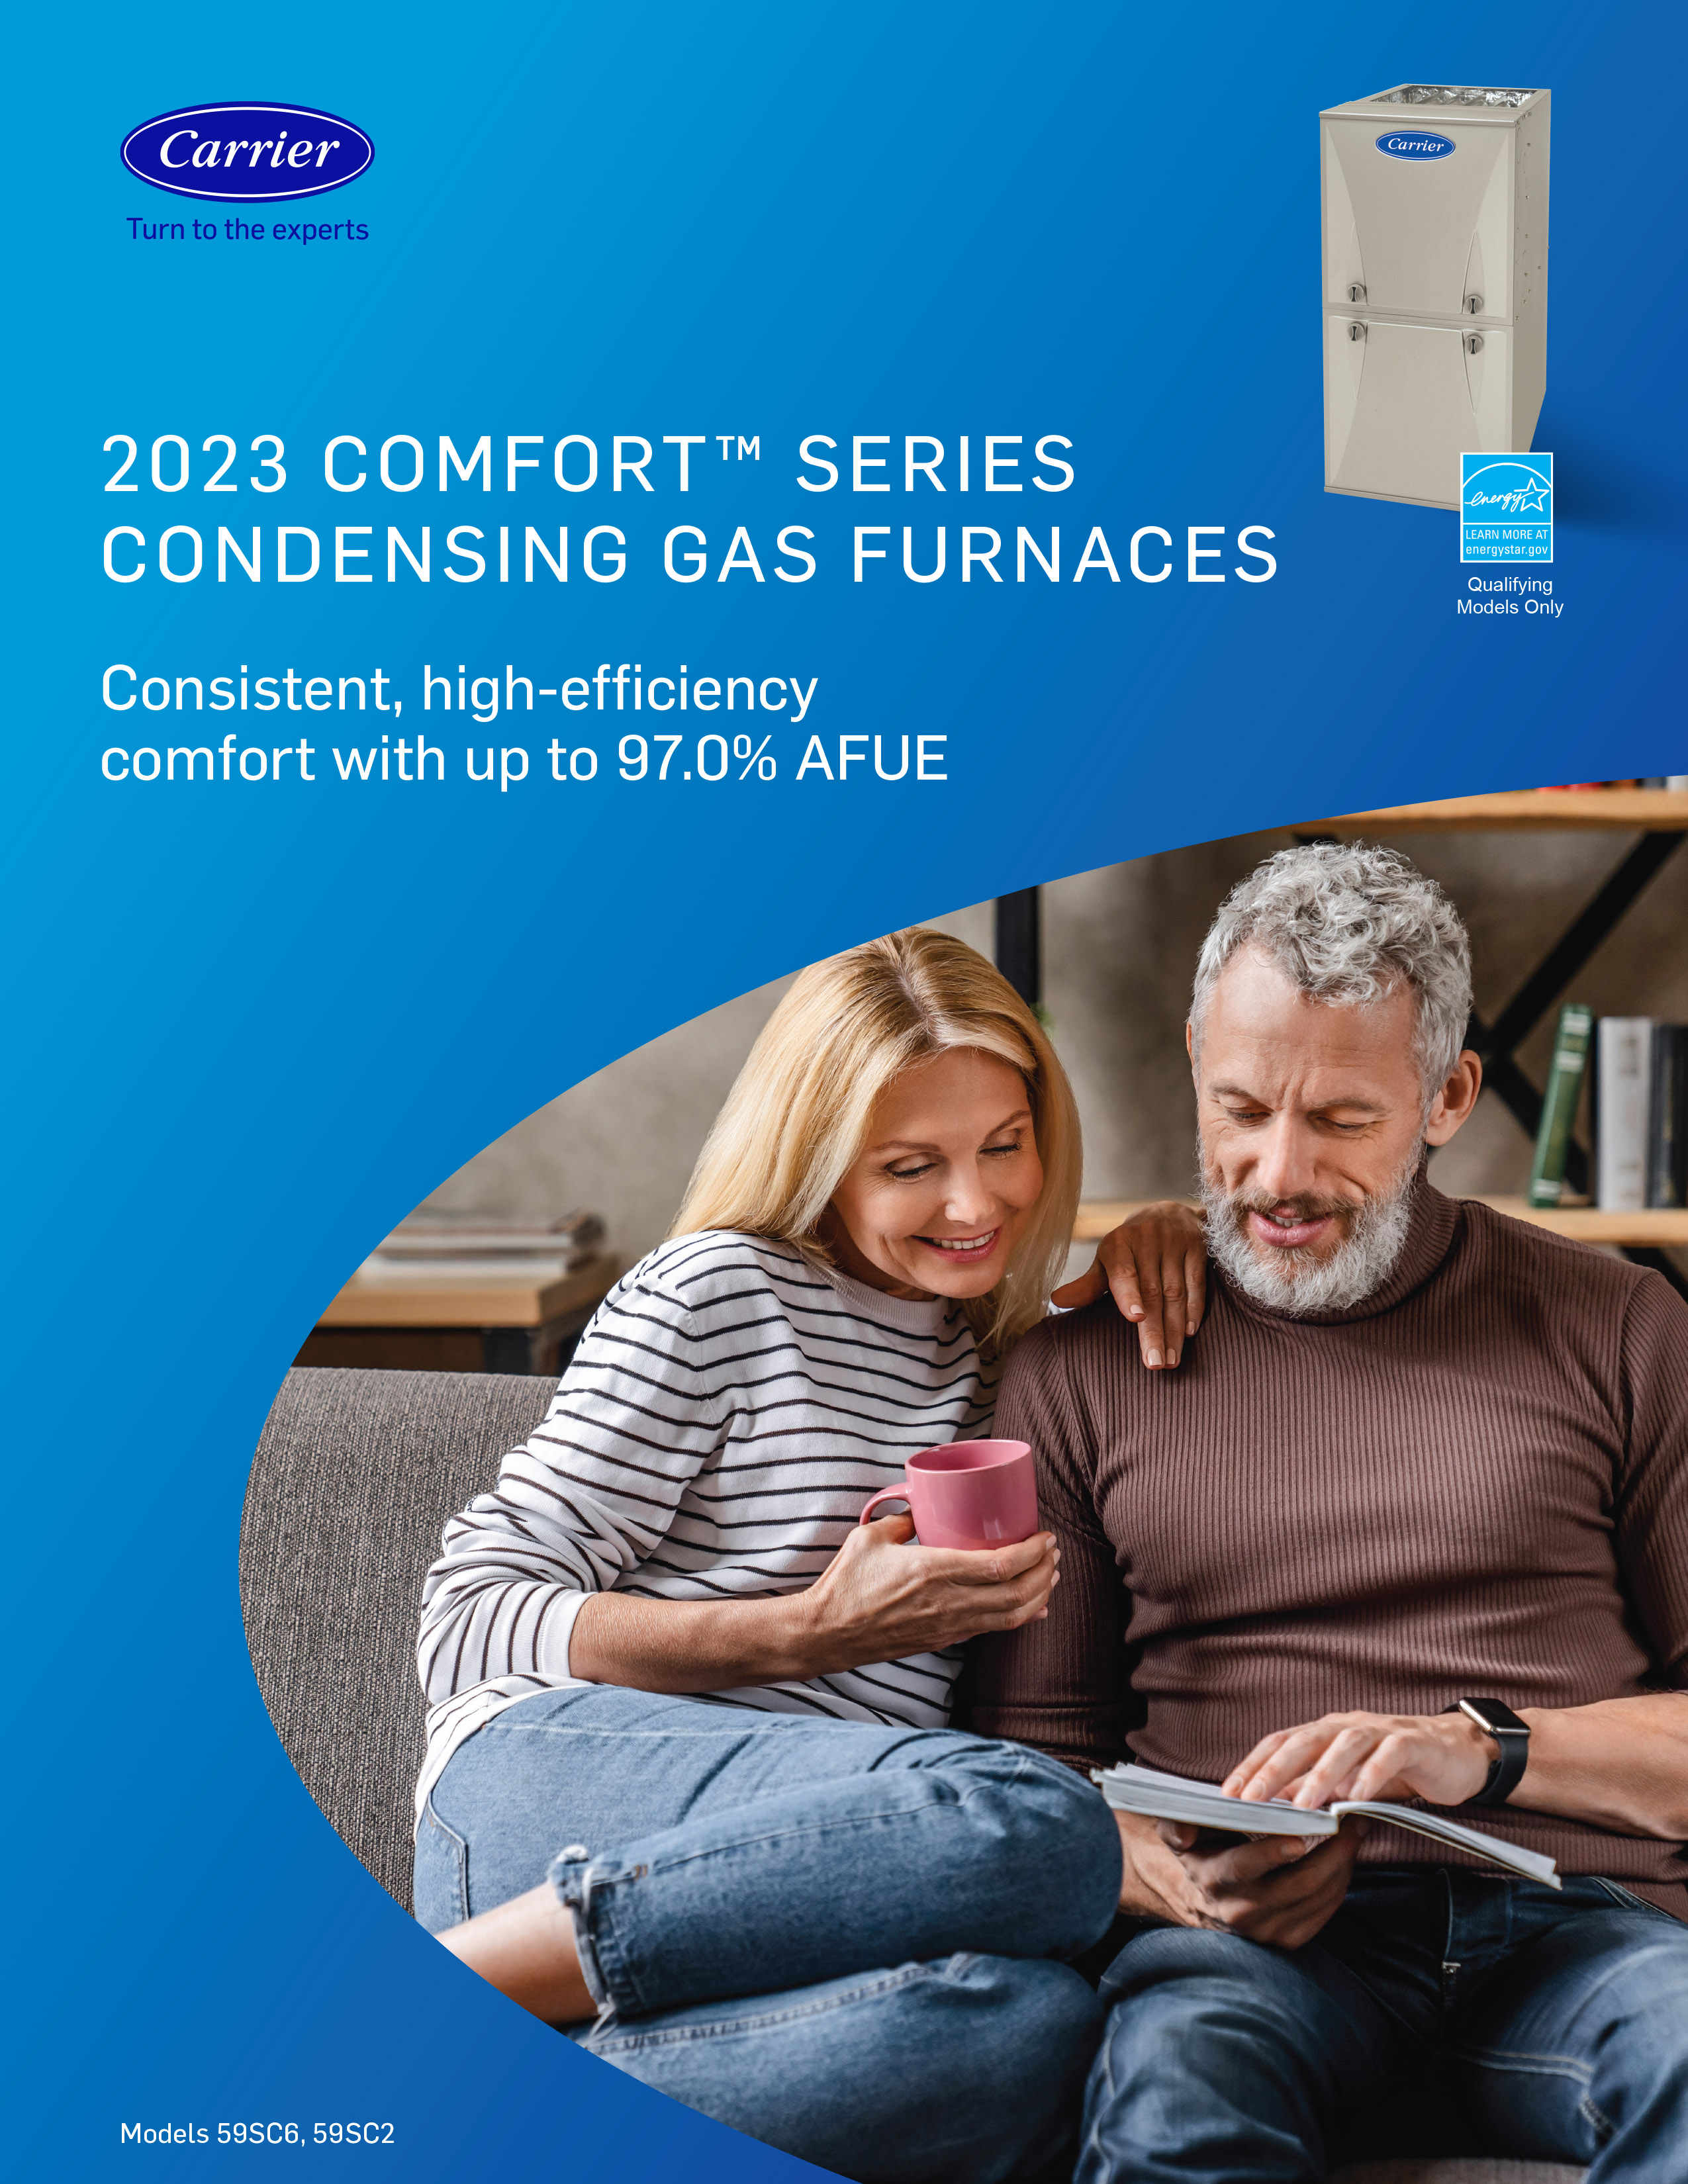 COMFORT(TM) SERIES CONDENSING GAS FURNACES Consistent, high-efficiency comfort with up to 97.0% AFUE. Happy couple on couch.